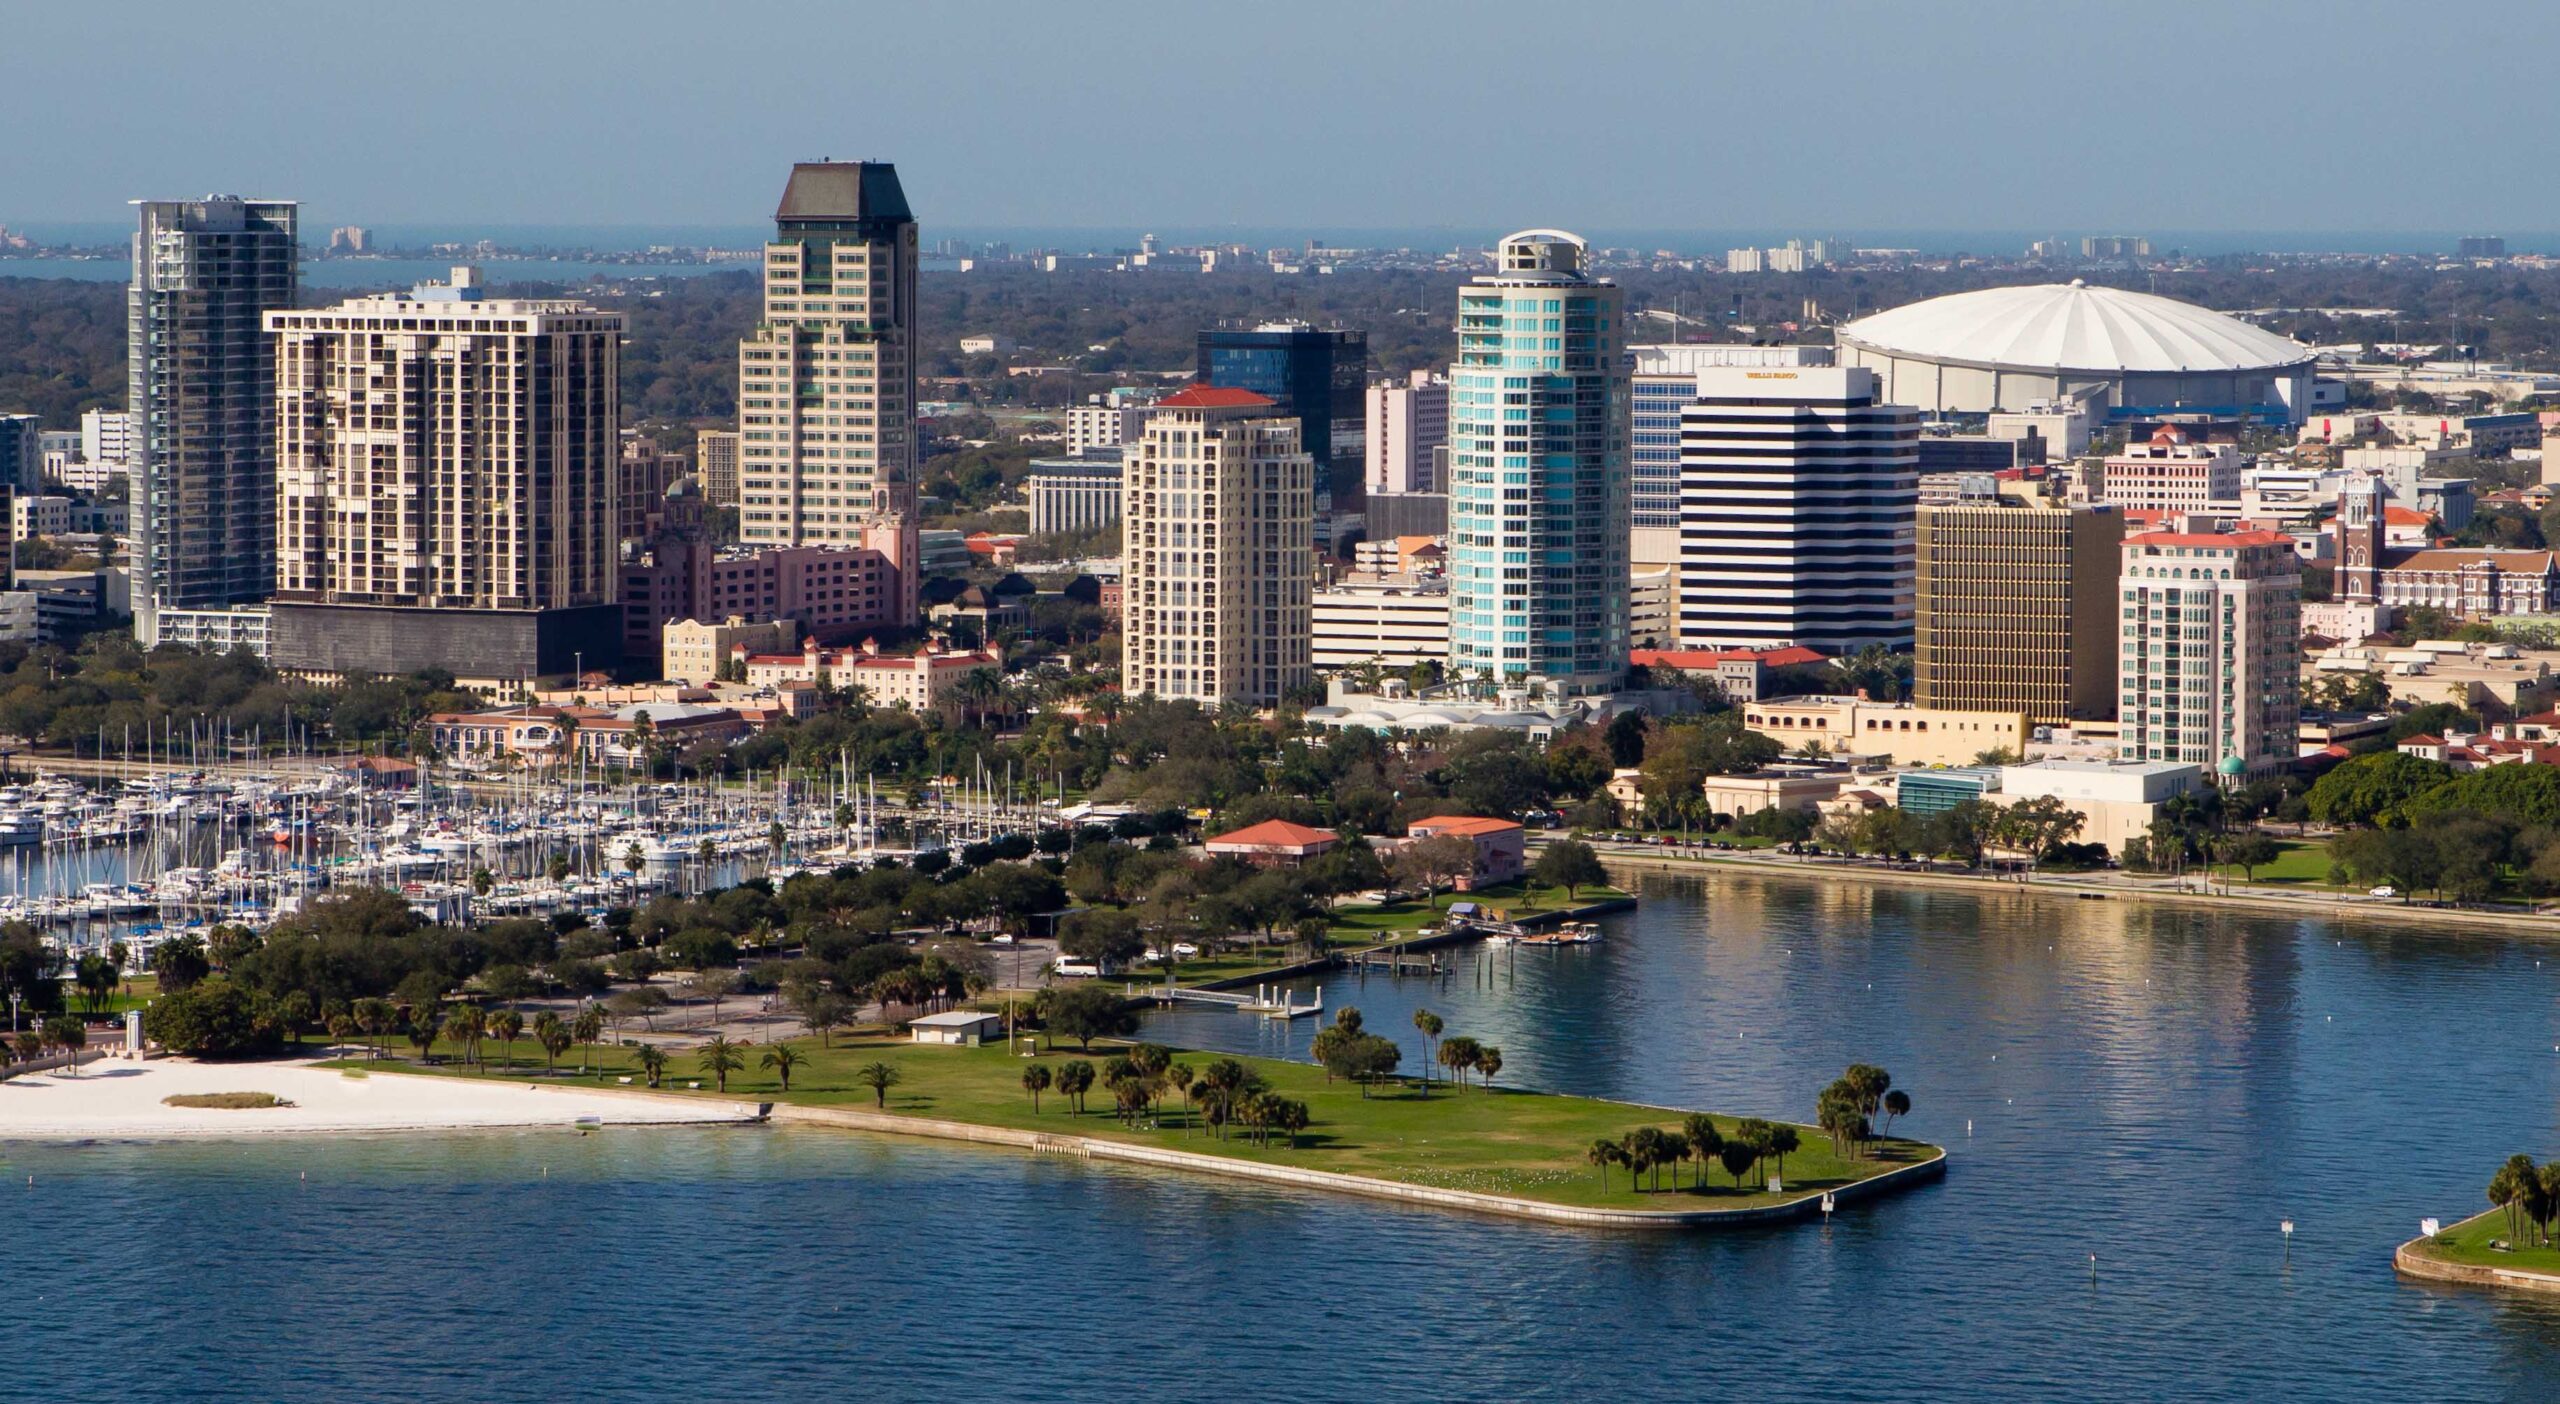 Join Us in St. Petersburg, FL for our 60th Annual Eastern Finance Association Meeting